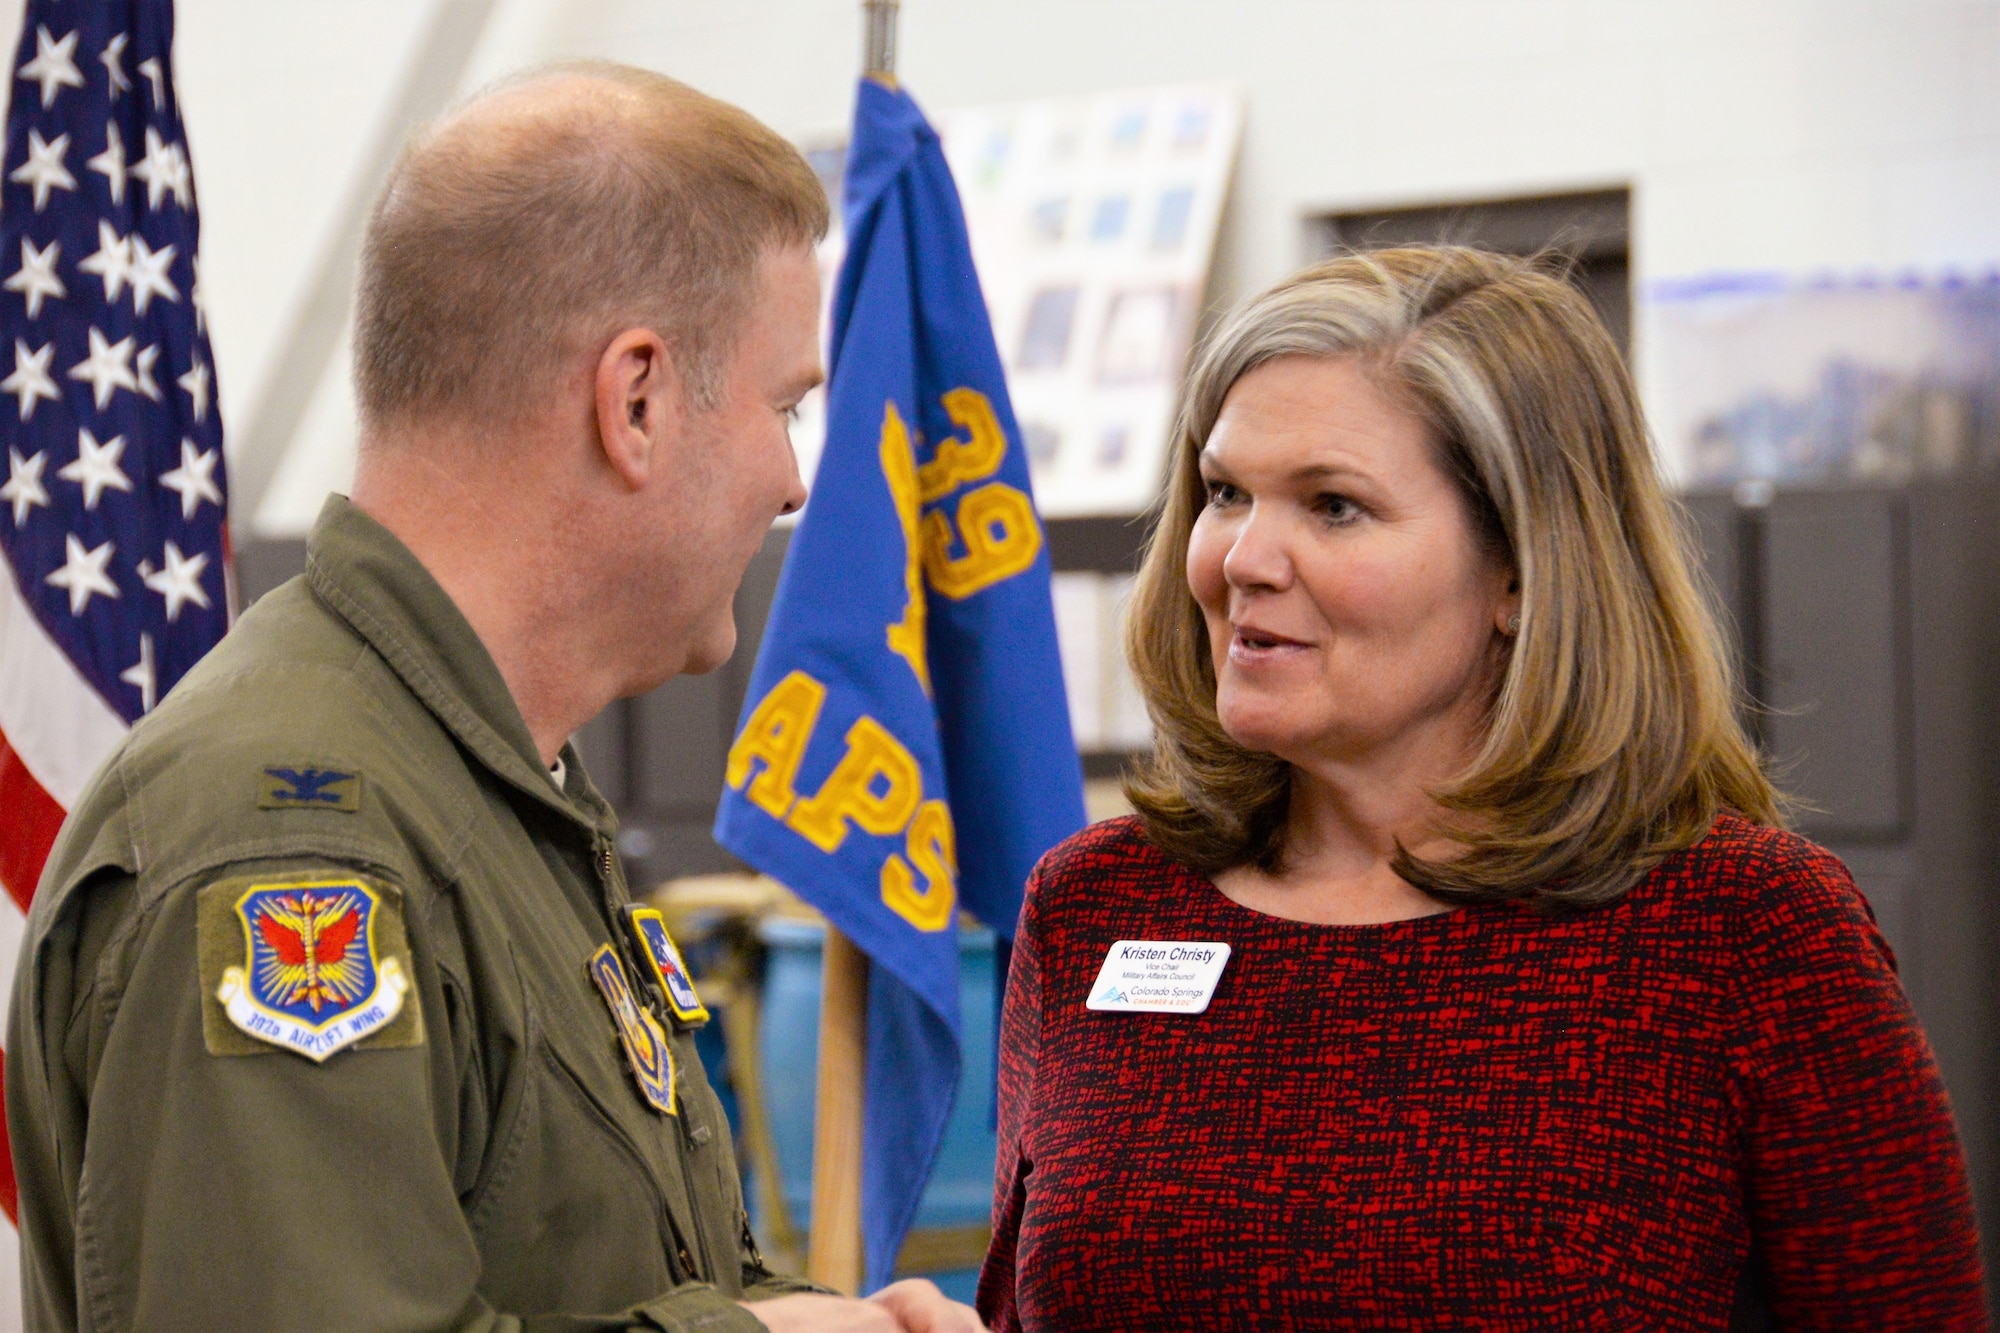 Kristen Christy, who was named Air Force Spouse of the Year, speaks with Col. James DeVere, the 302nd Airlift Wing commander, during an Area Chiefs of Staff forum March 21, 2018.